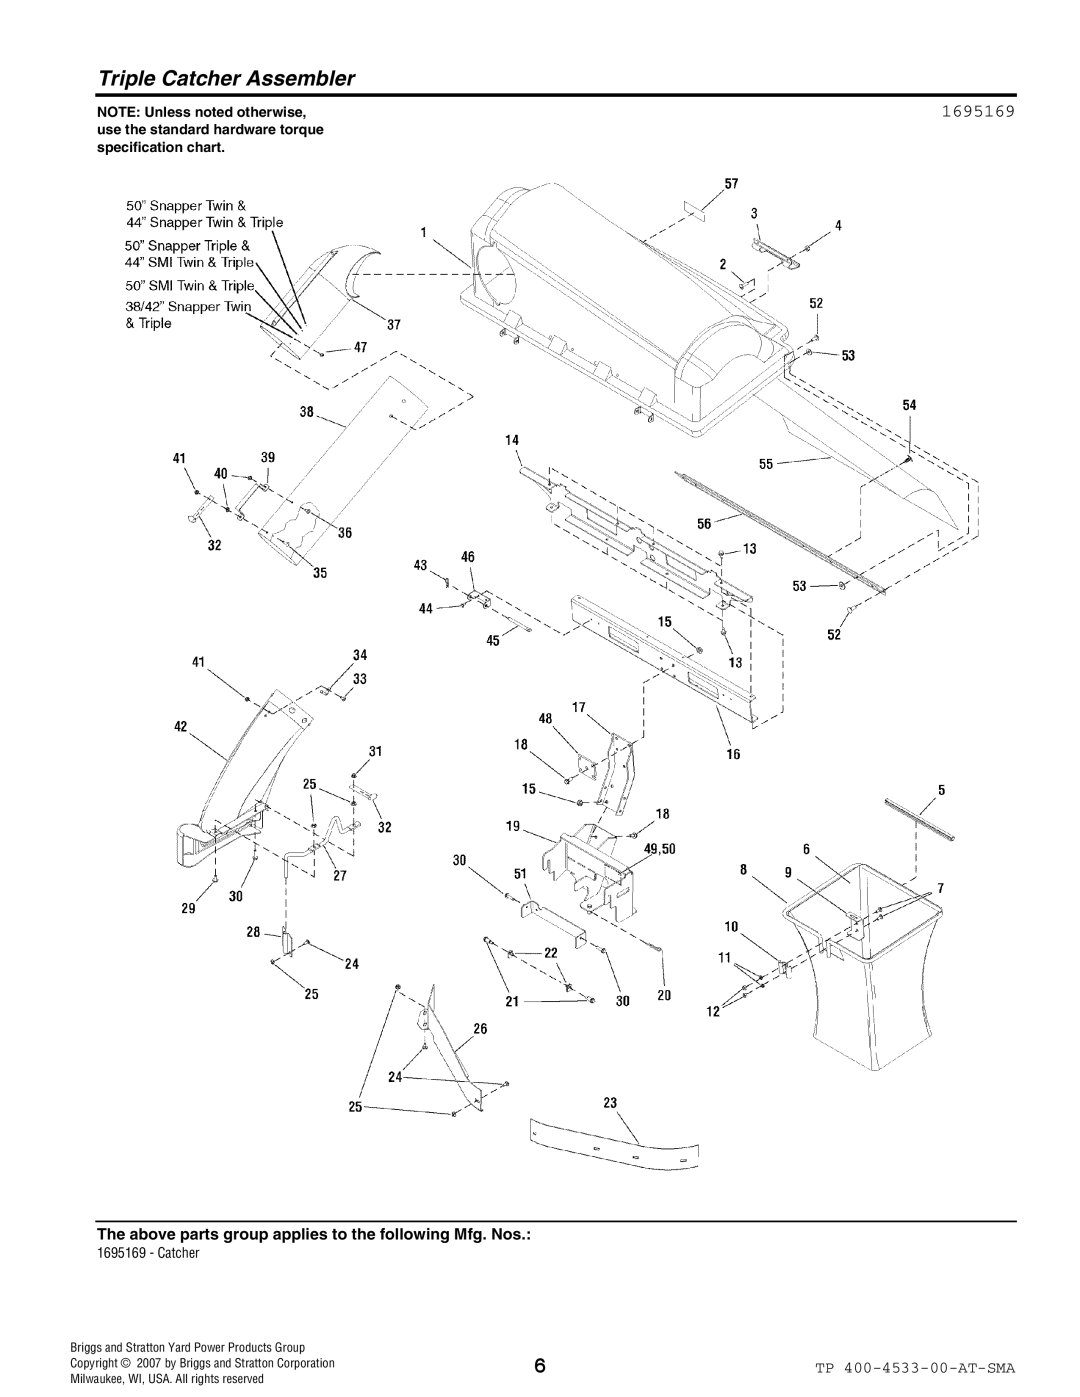 Snapper 4533 Triple Catcher Assembler, 1695169, NOTE Unless noted otherwise, Briggs and Stratton Yard Power Products Group 